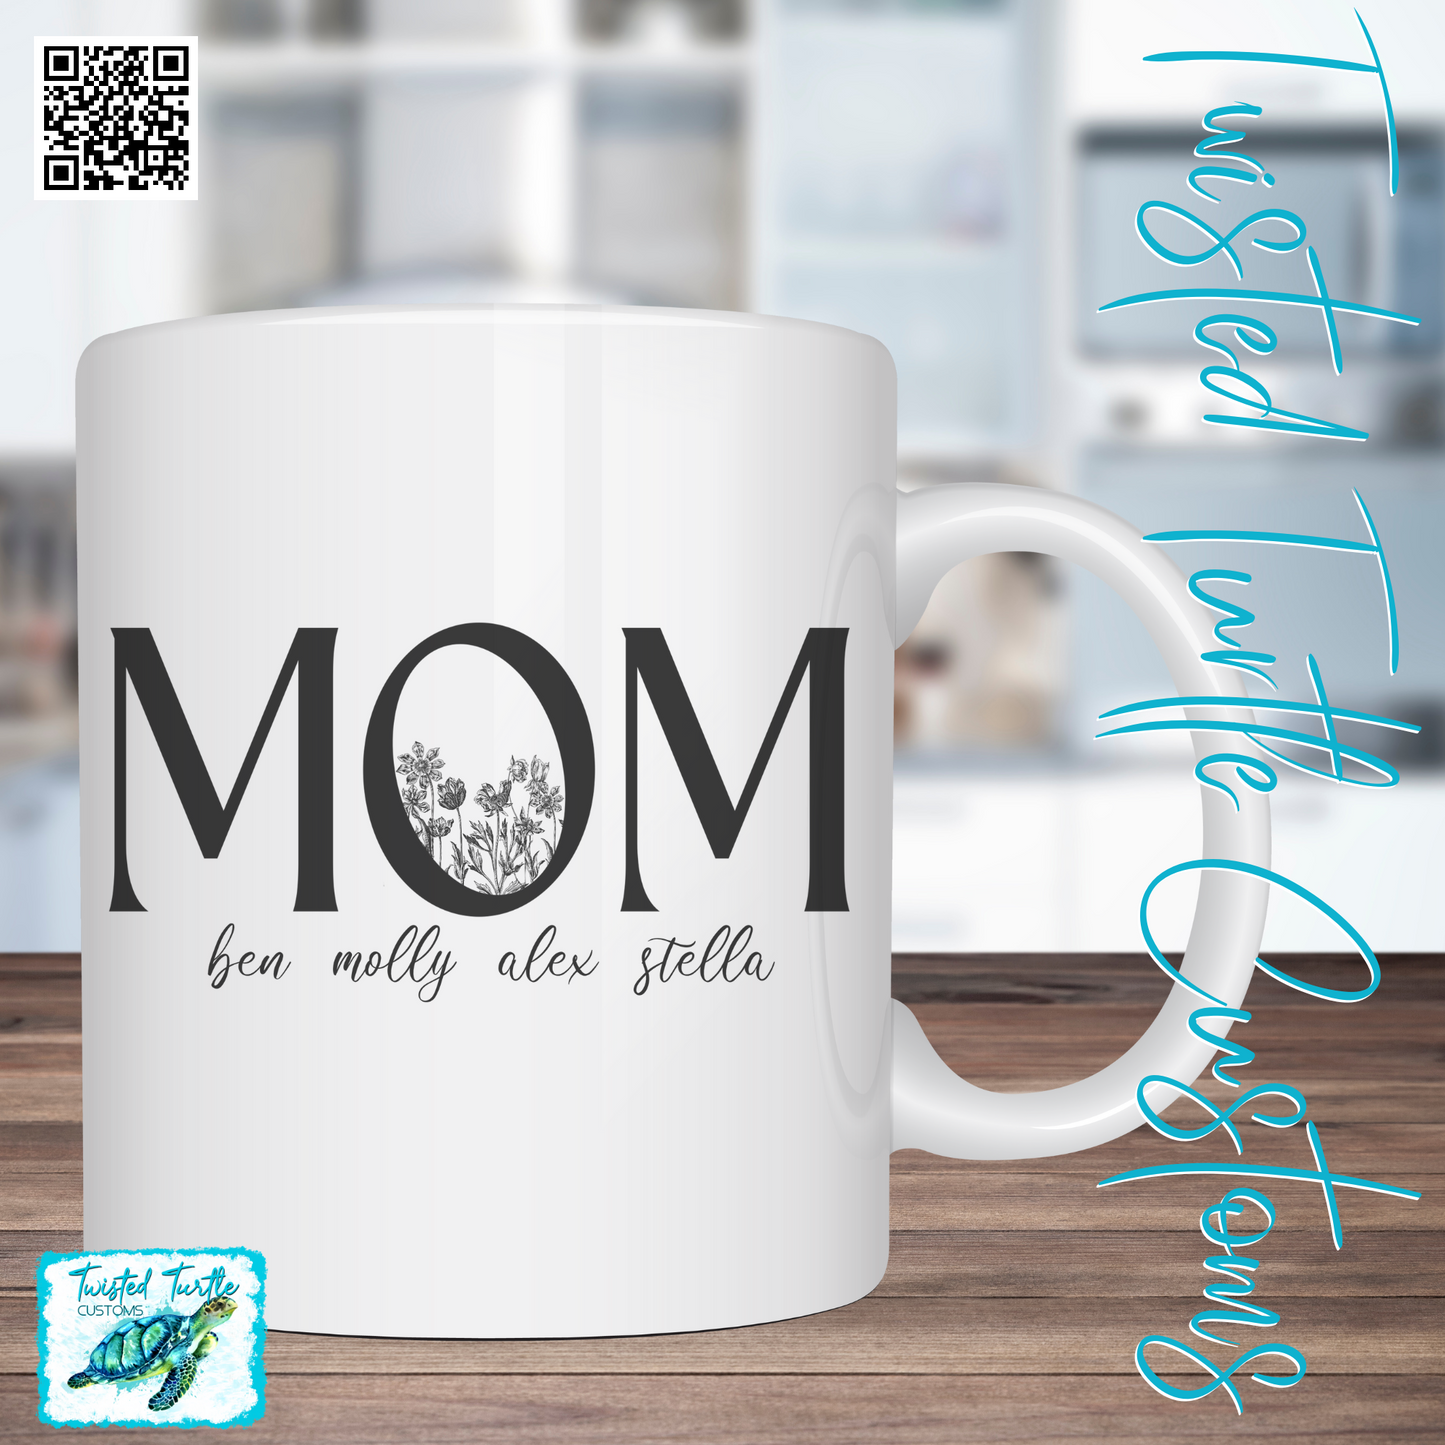 Personalized Mom Flower Sketch Coffee mug makes a great gift for Mom this Mother’s Day.